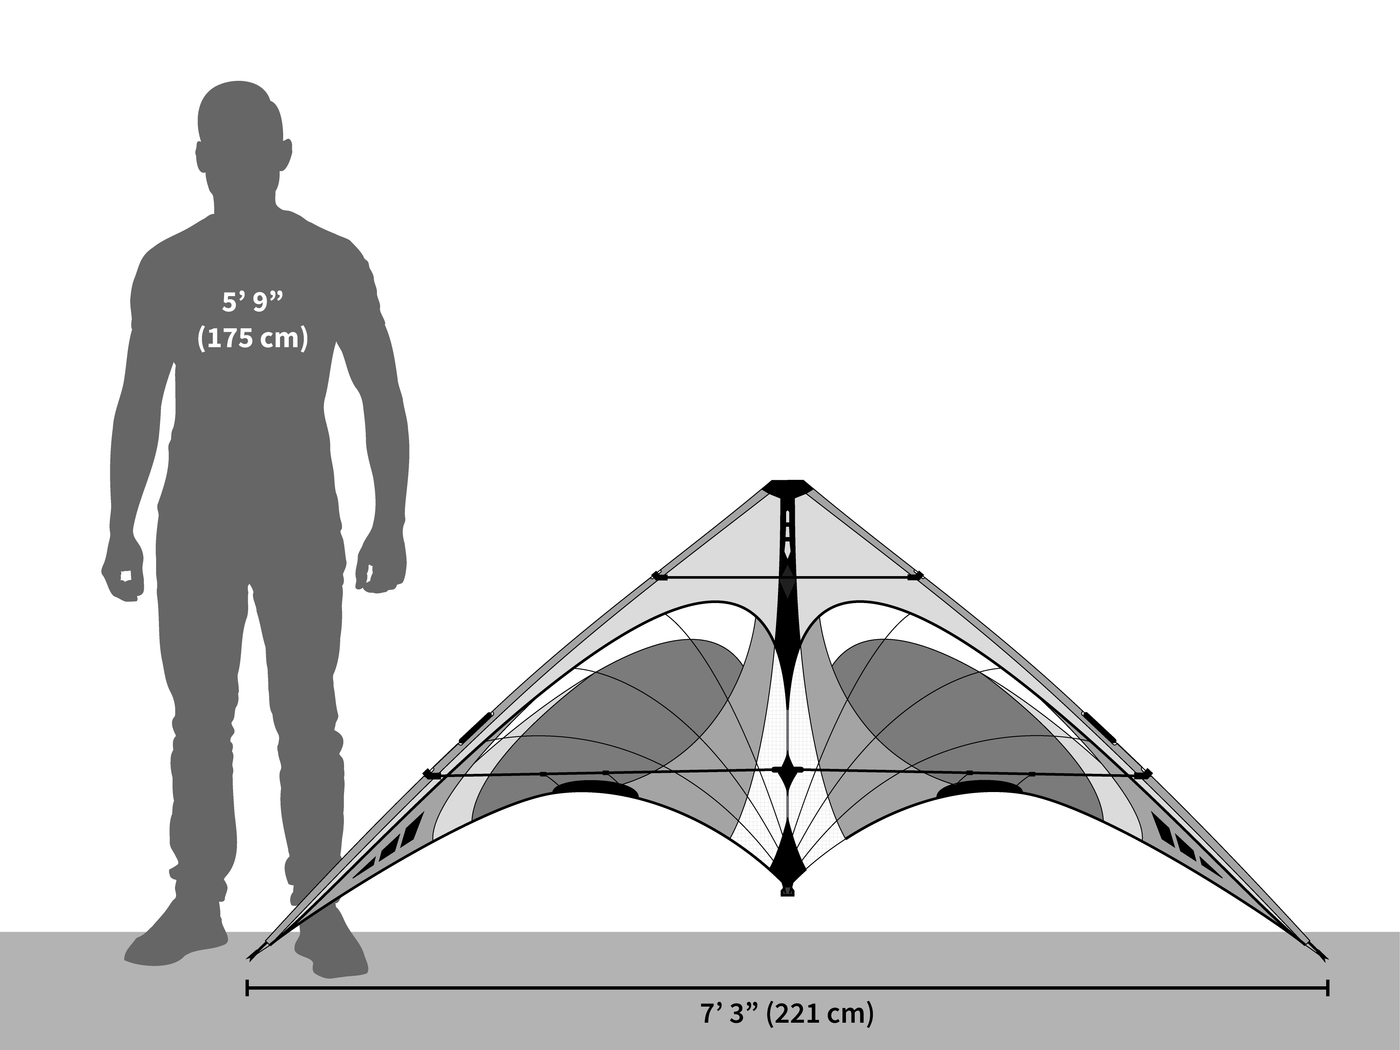 A diagram illustrating the size of the Quantum in comparison to a 5 foot 9 inch tall man.